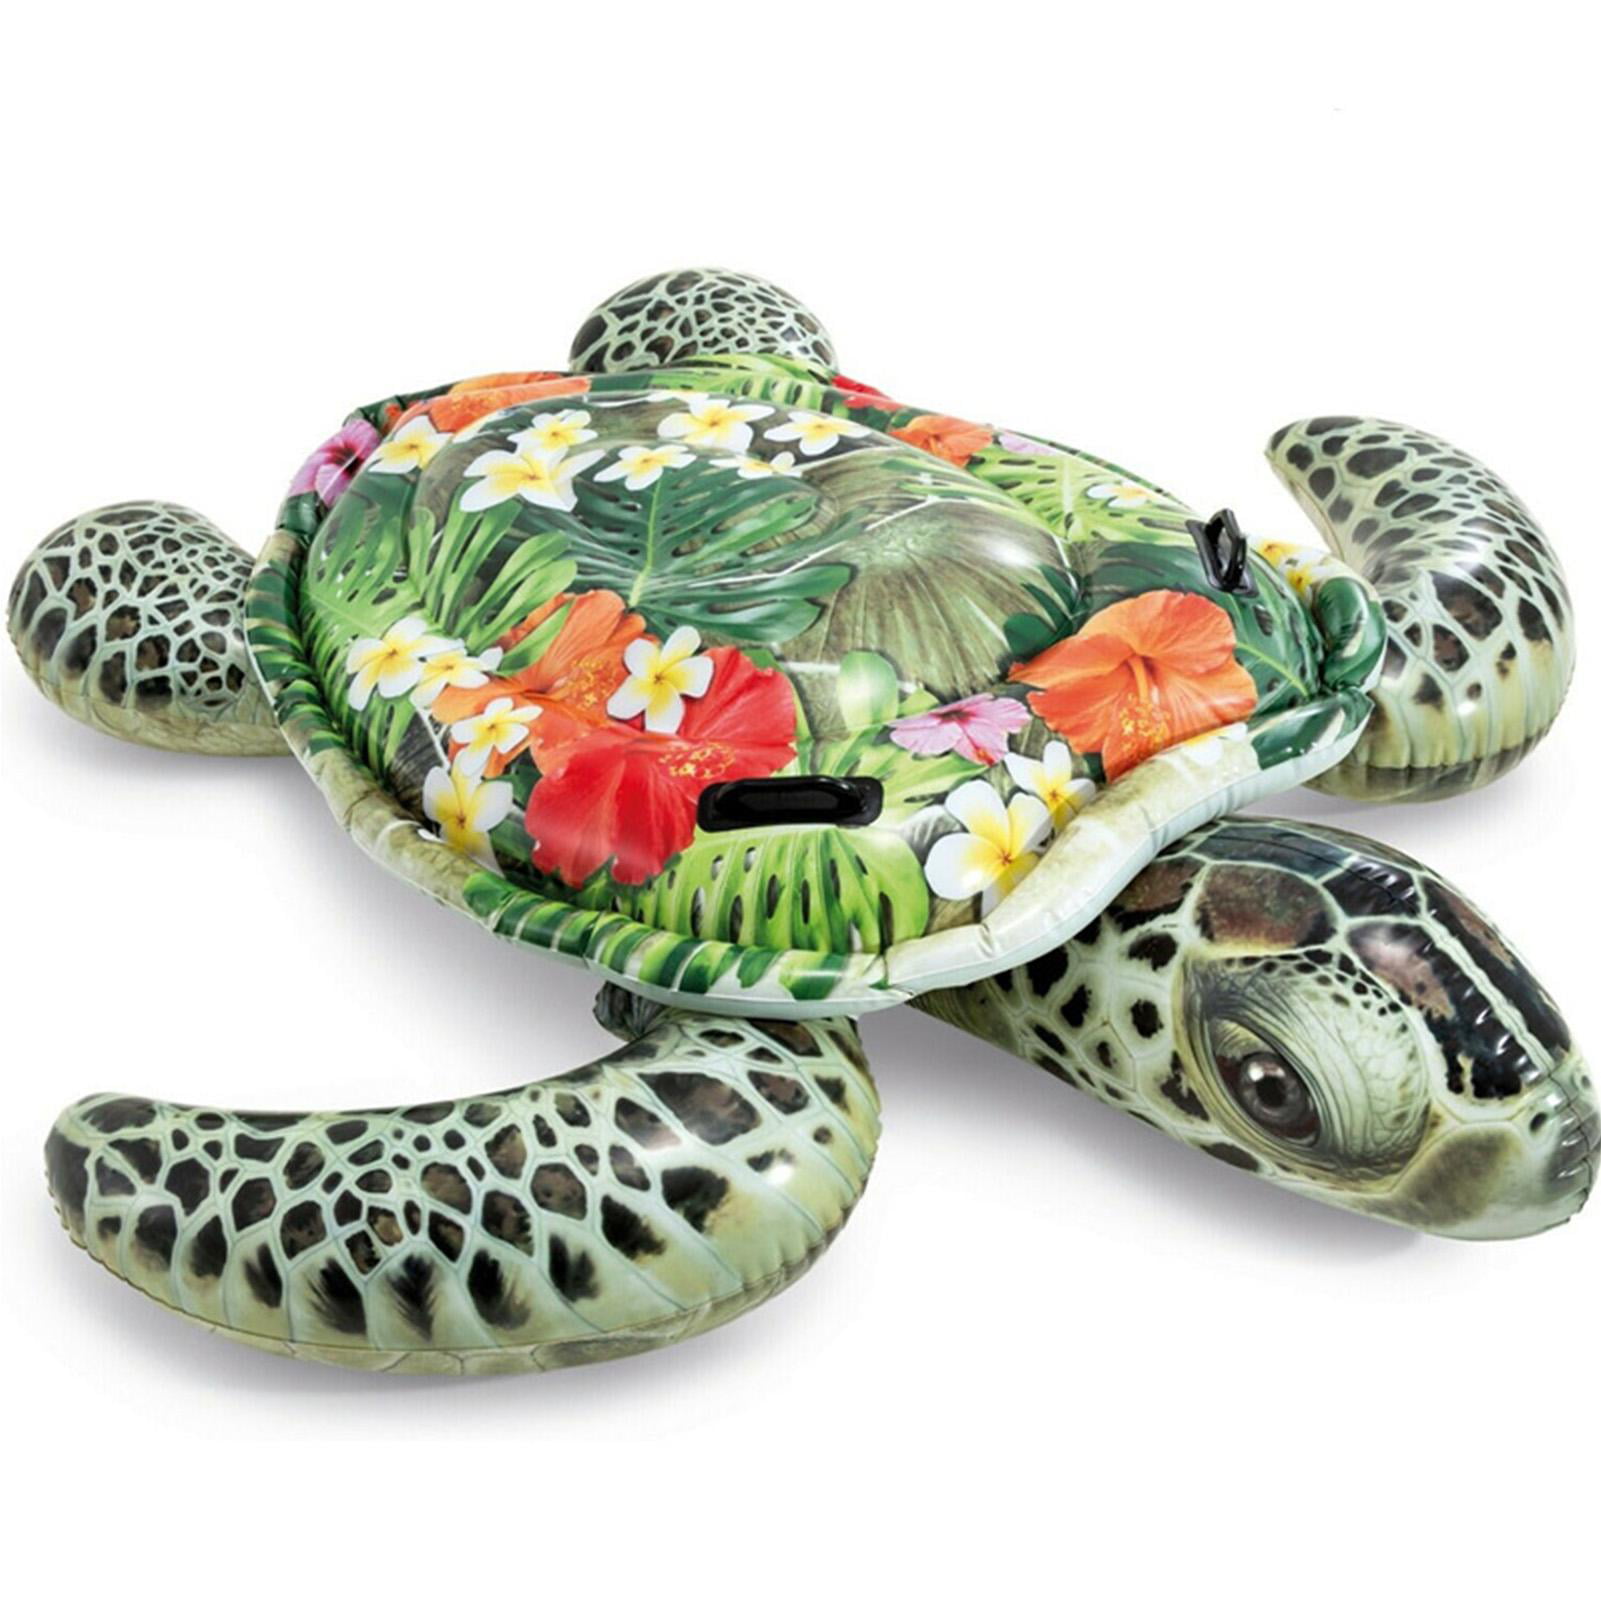 FREE SHIPPING Swimming Pool Inflatable Float Gigantic Sea Turtle 8 Ft 2 Pack 